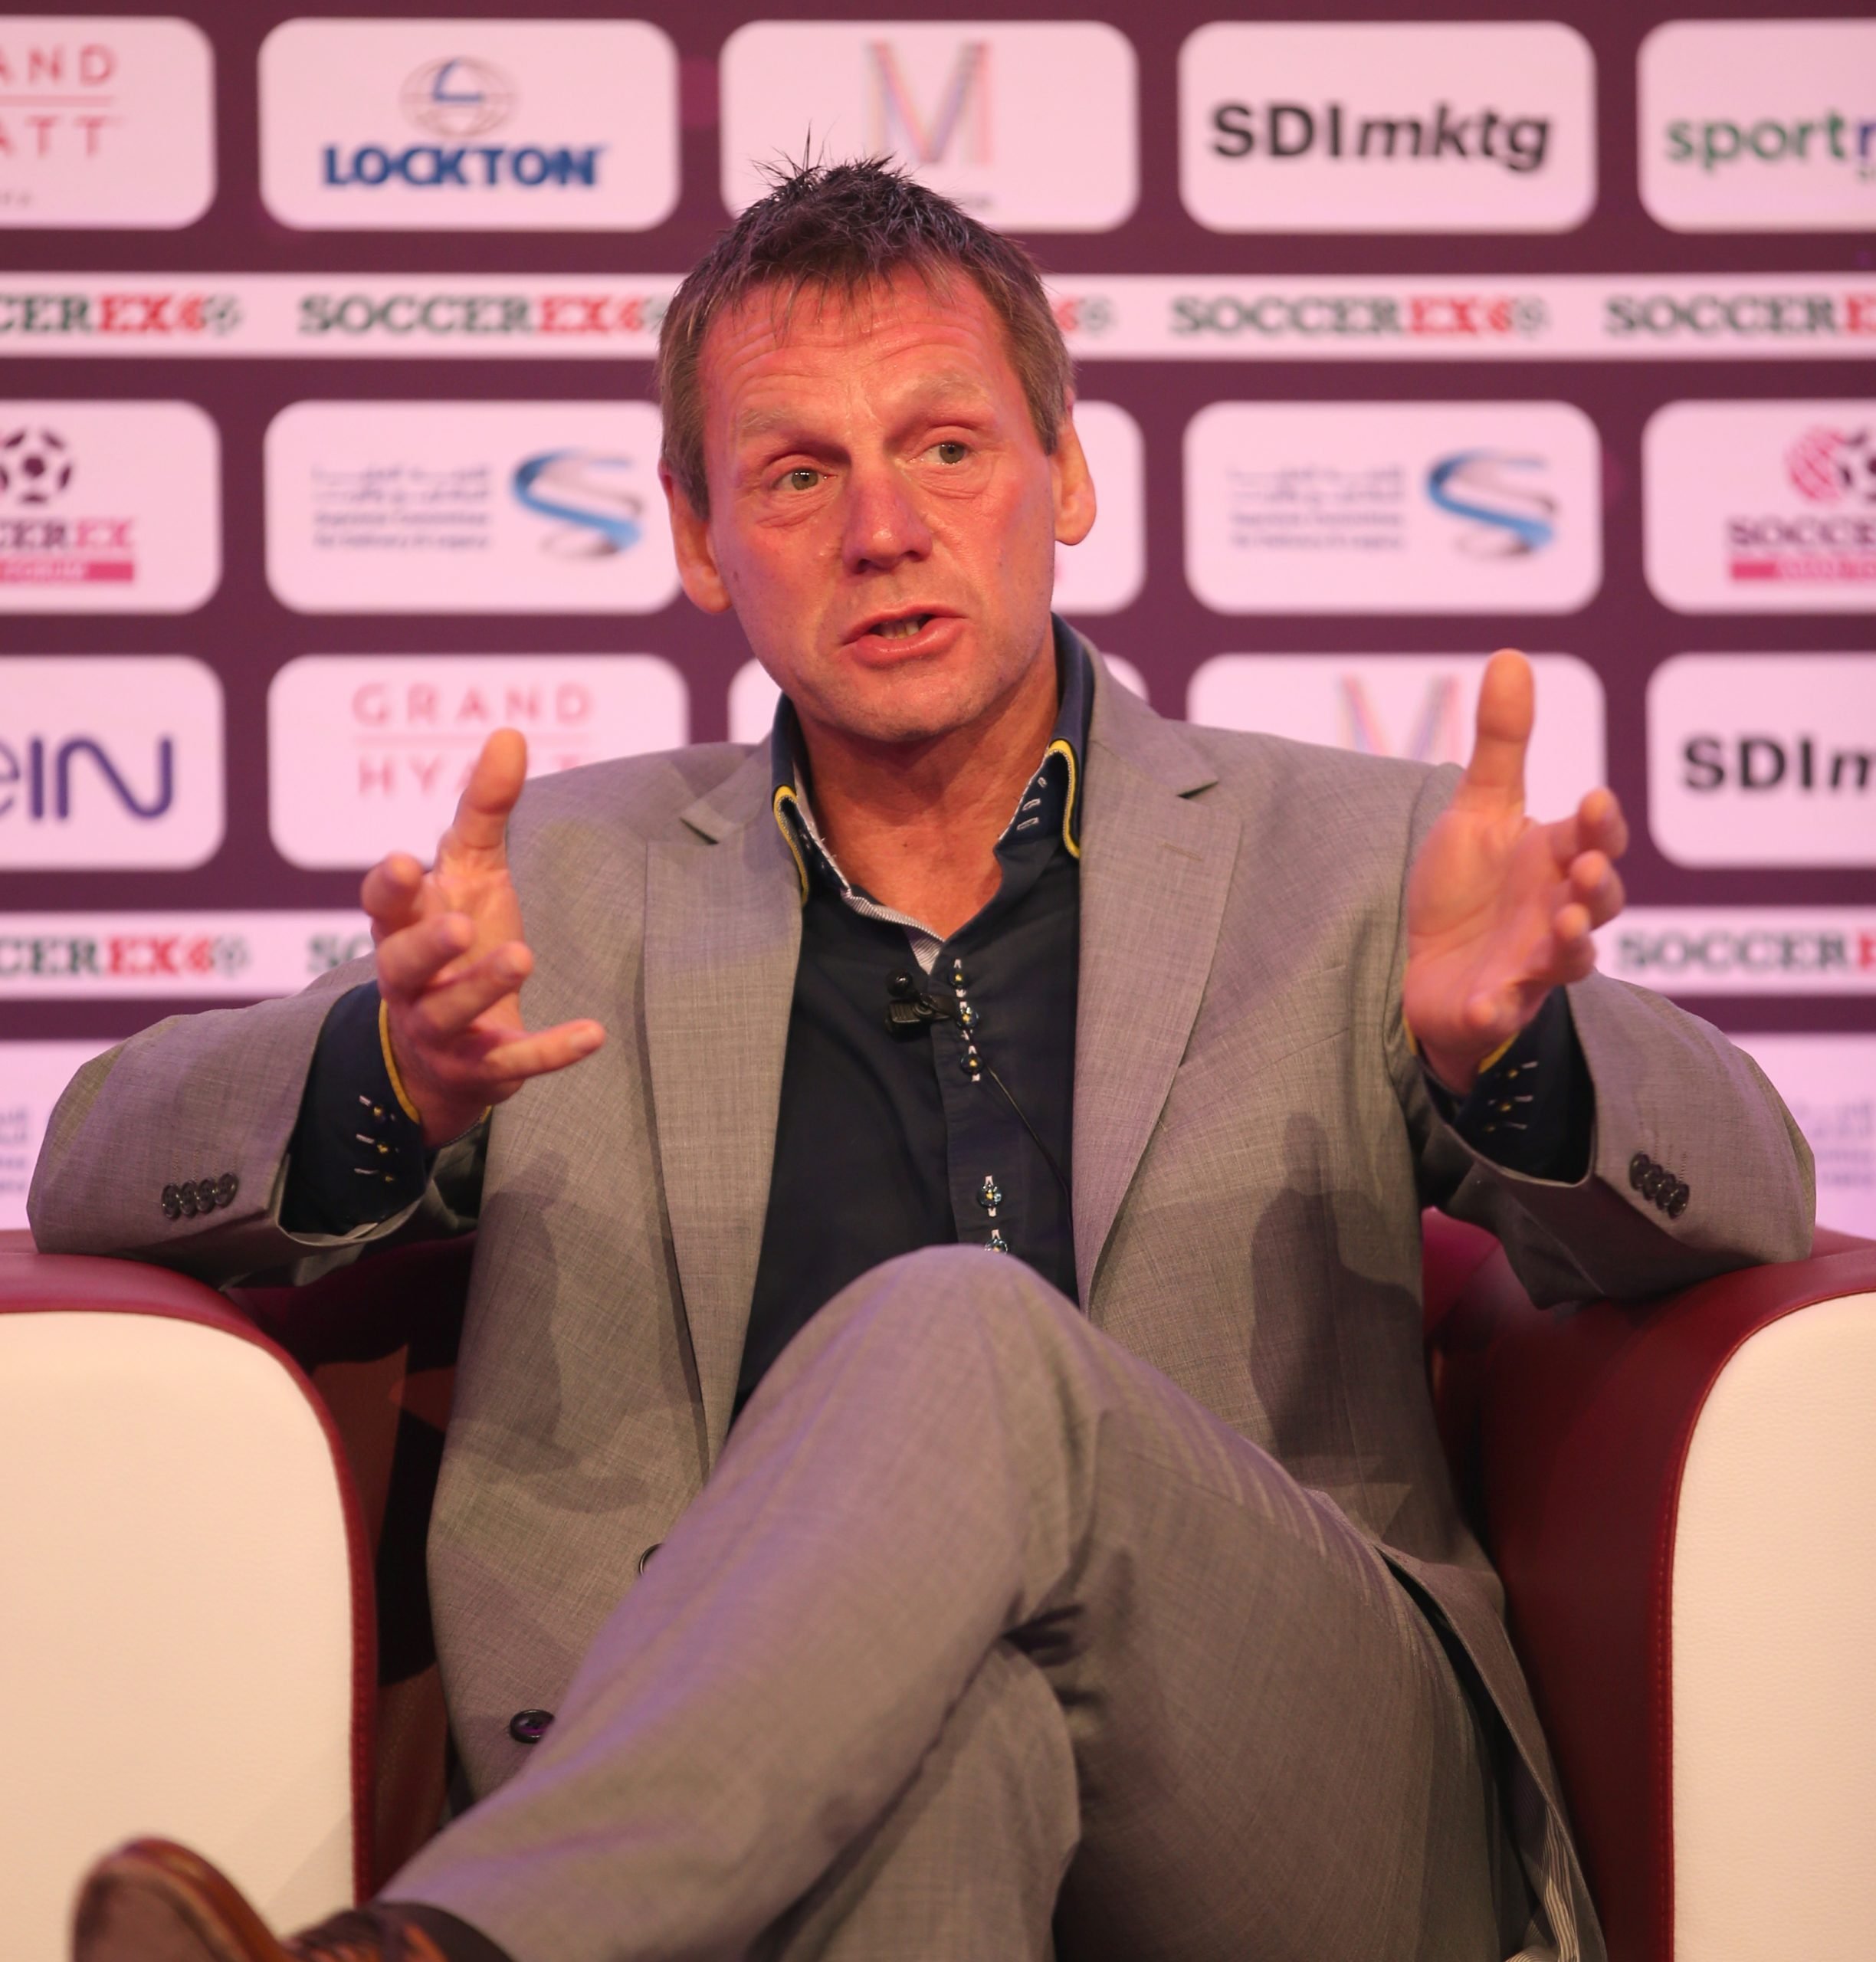 Qatar 2022: I don’t want to see them play - Stuart Pearce tells Southgate to drop 2 players